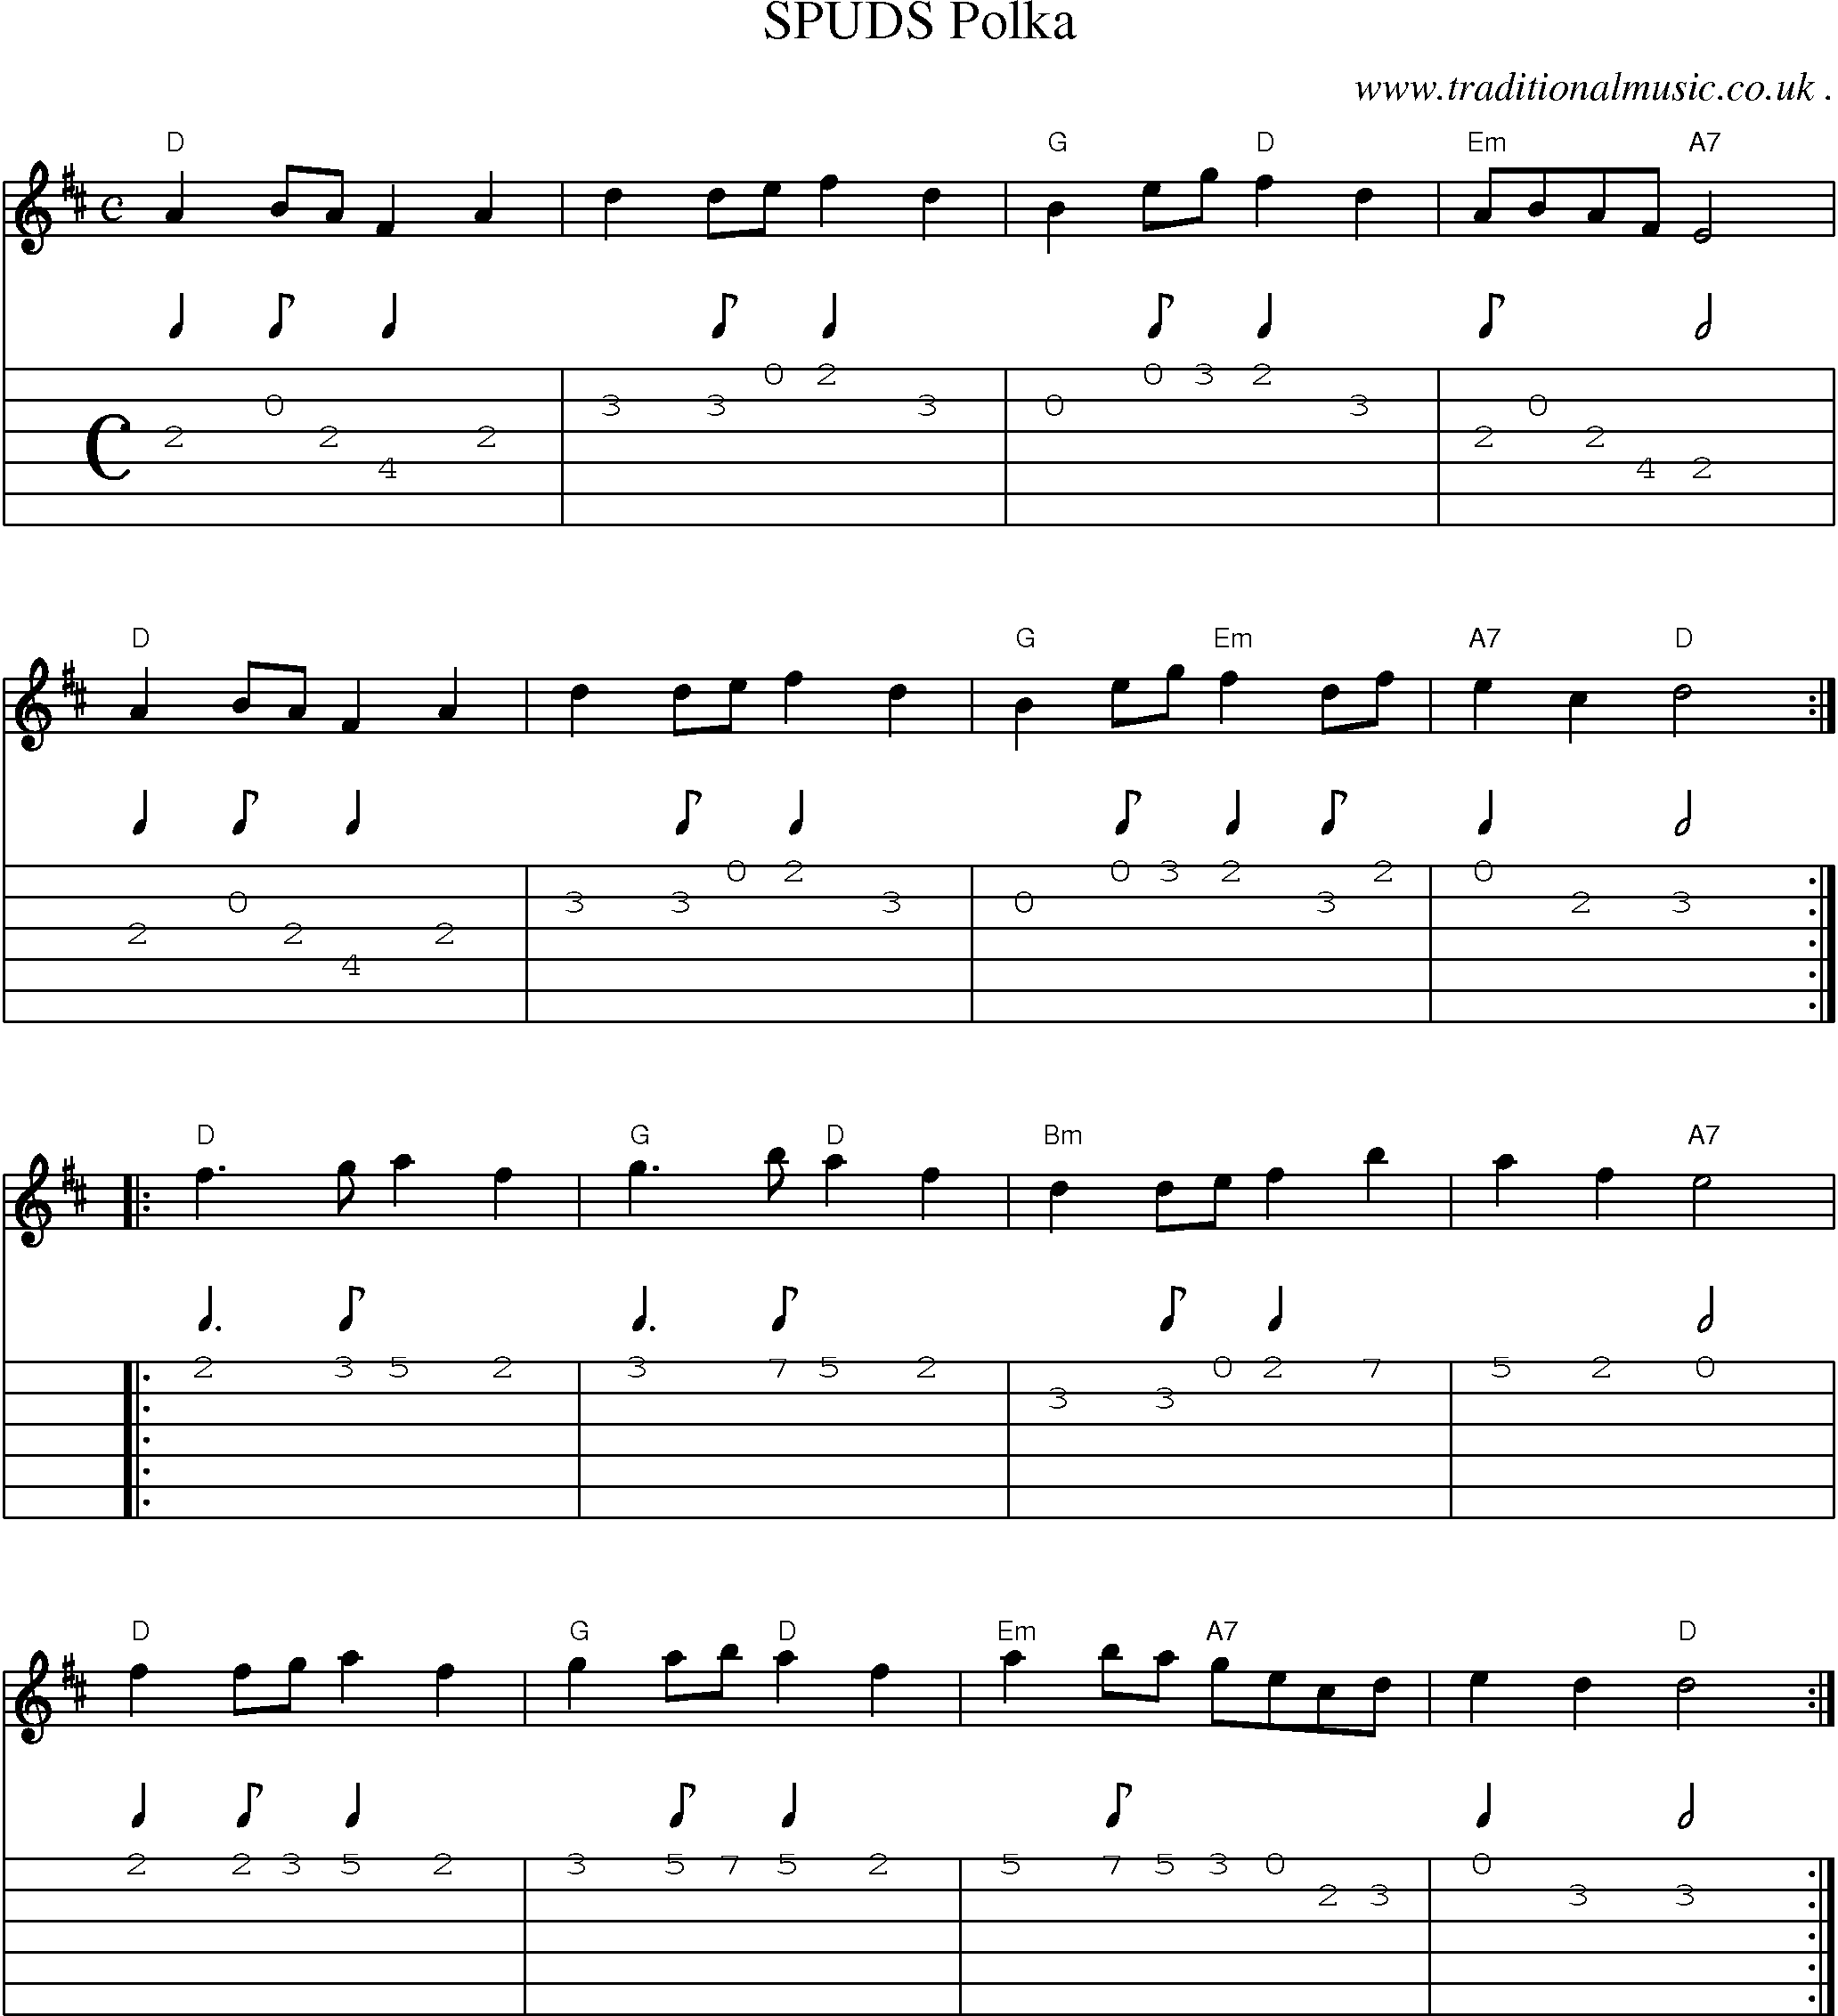 Music Score and Guitar Tabs for Spuds Polka